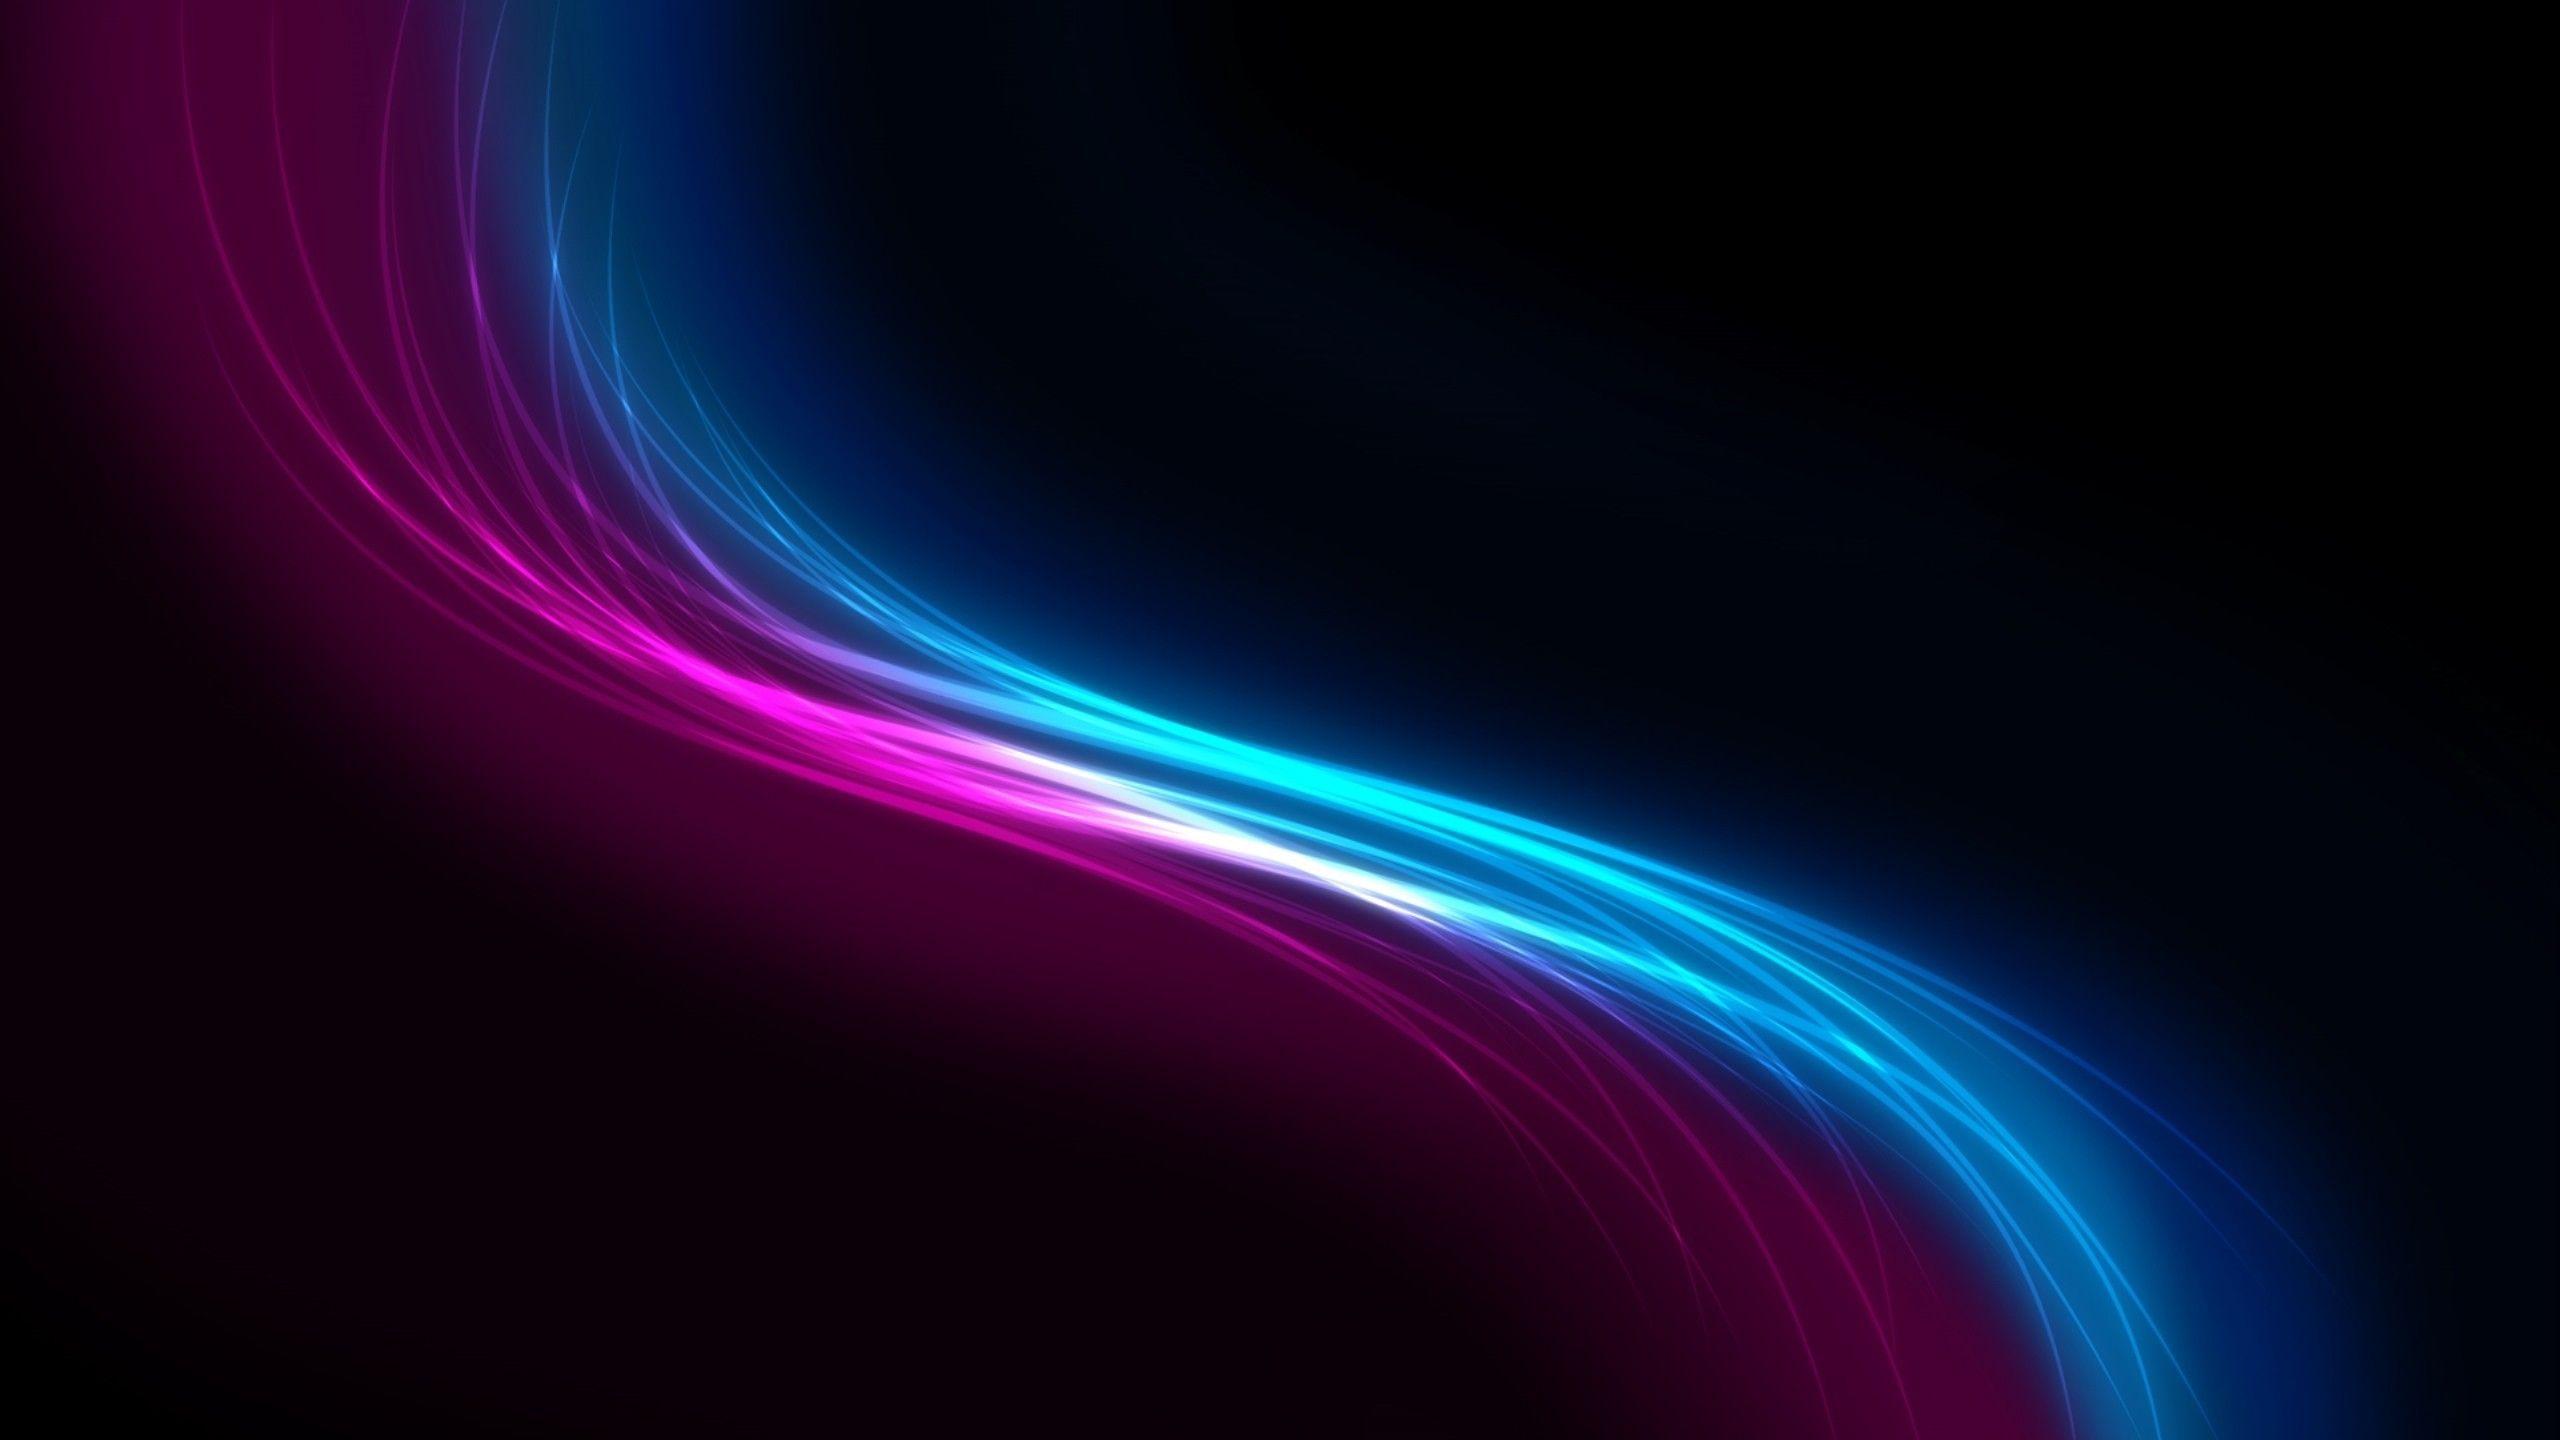 Pink and Black Wallpaper